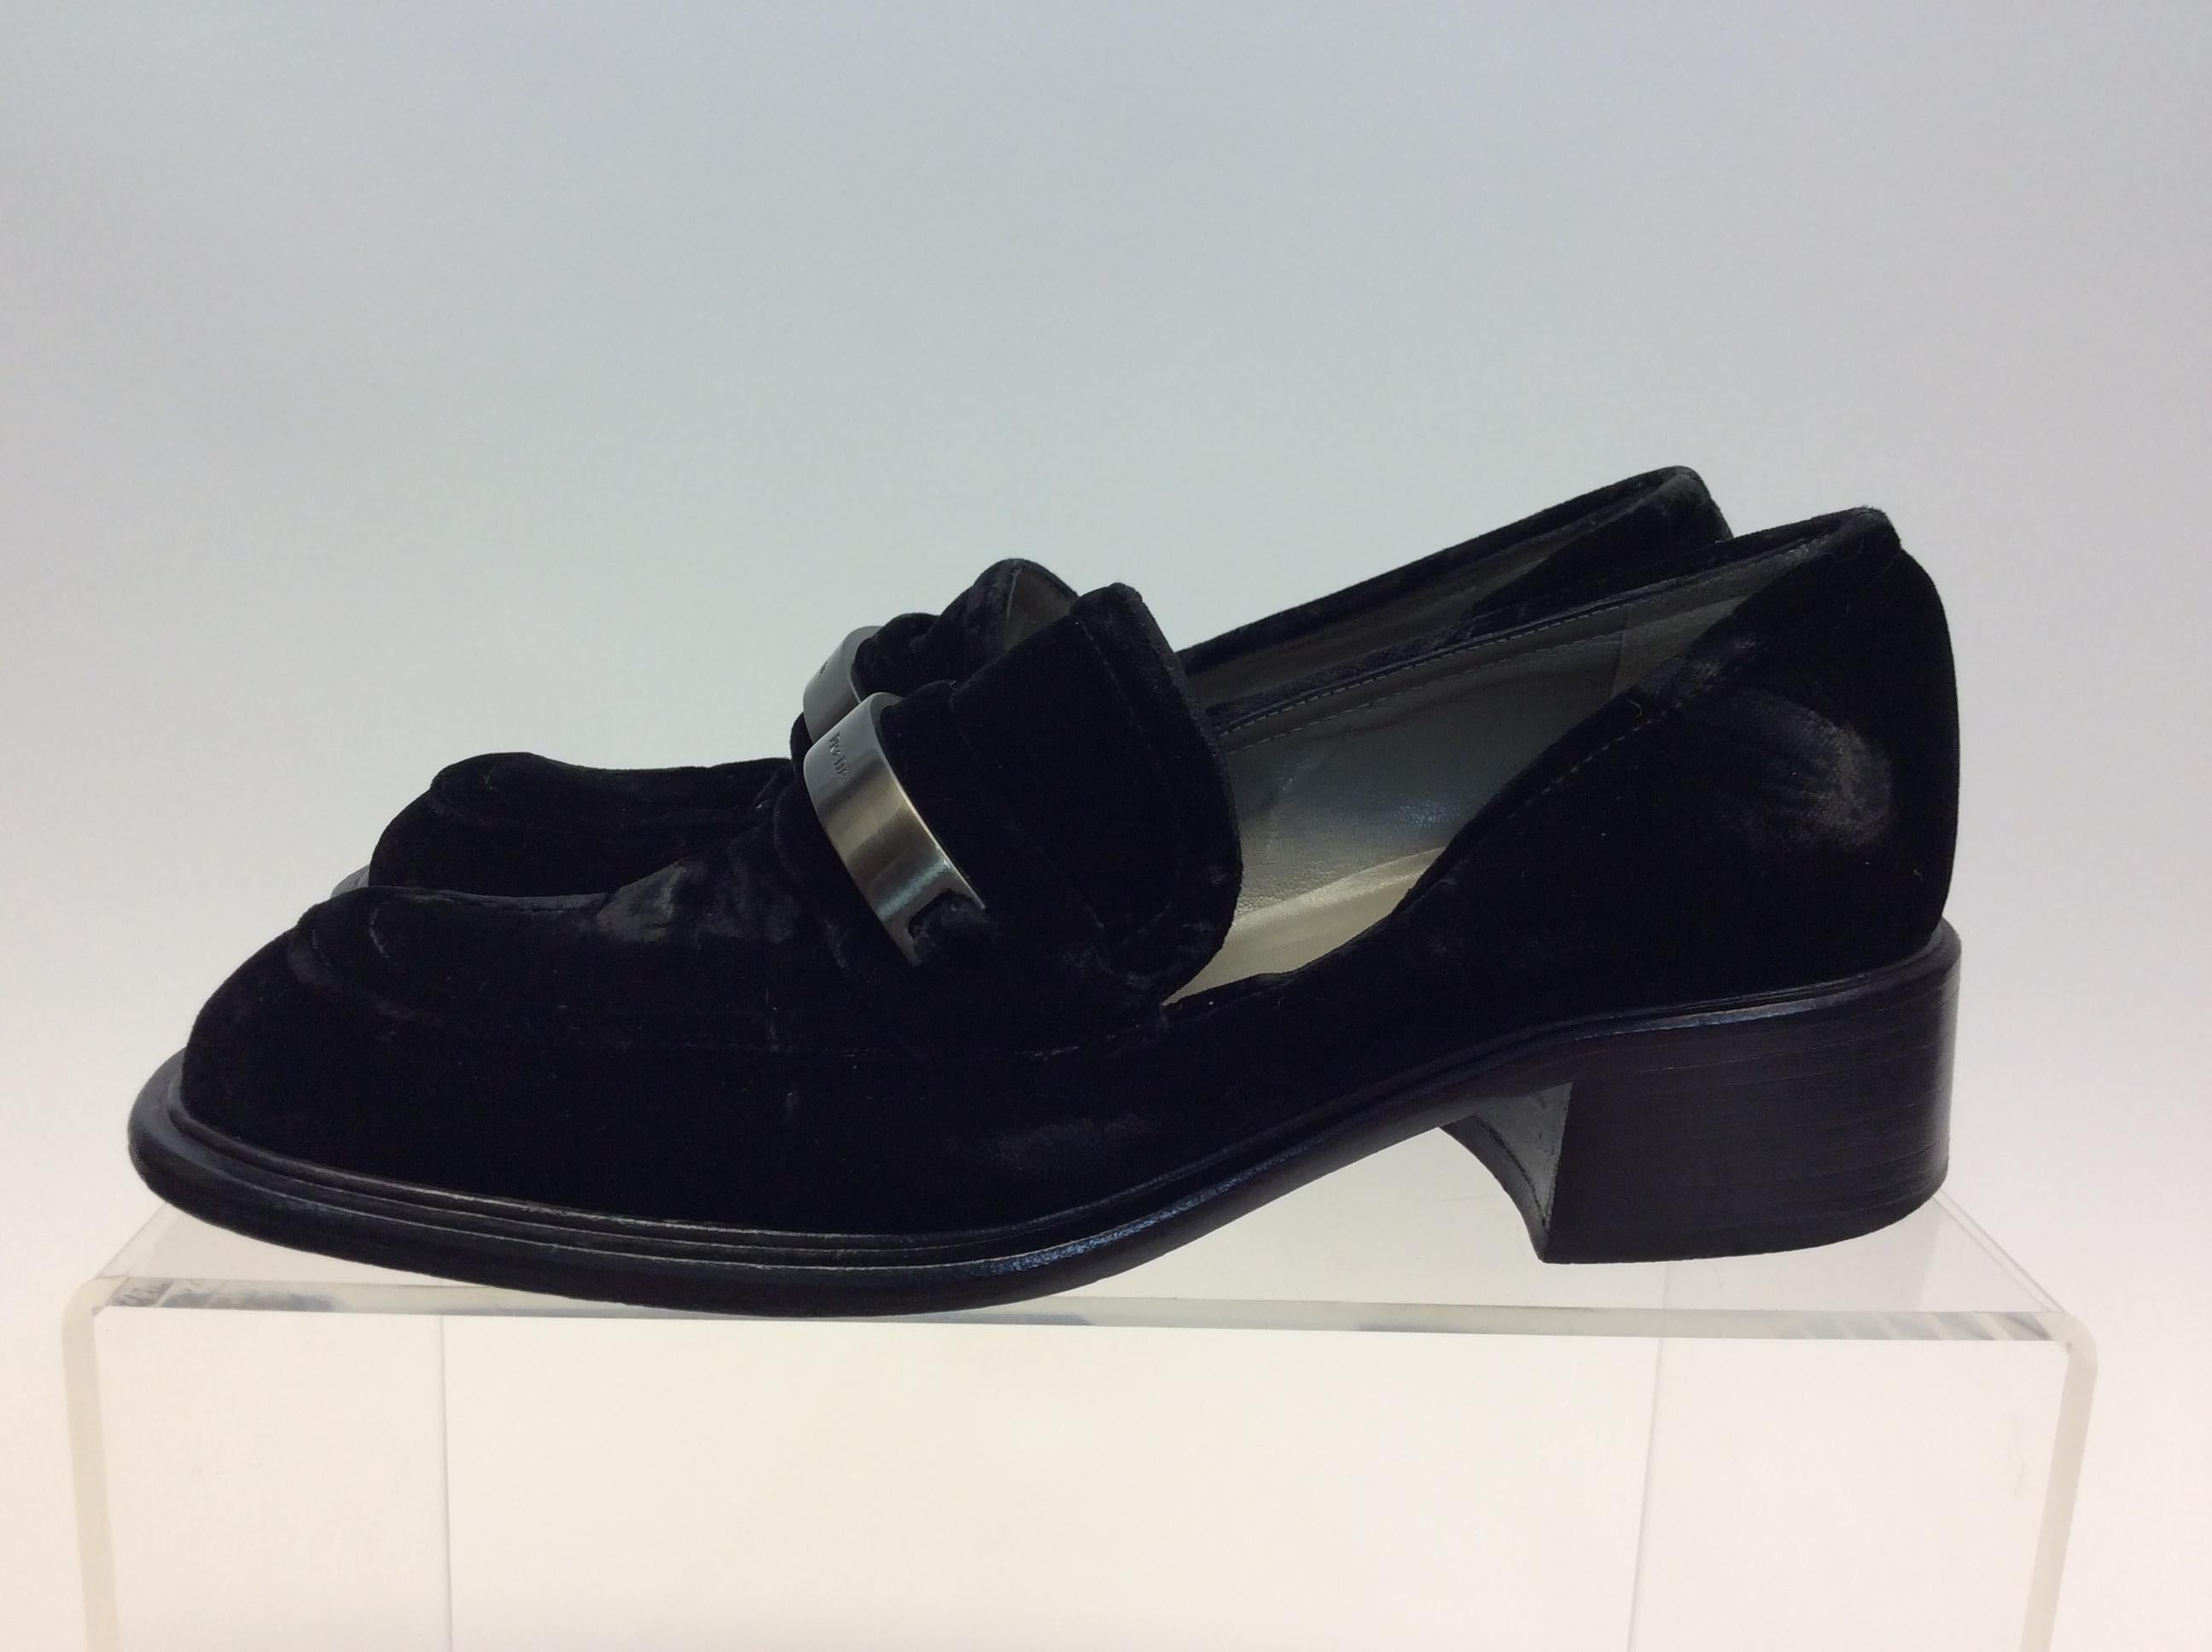 Prada Black Velvet Loafers with Silver Hardware
$199
Made in Italy
Suede
Size 36
1.5